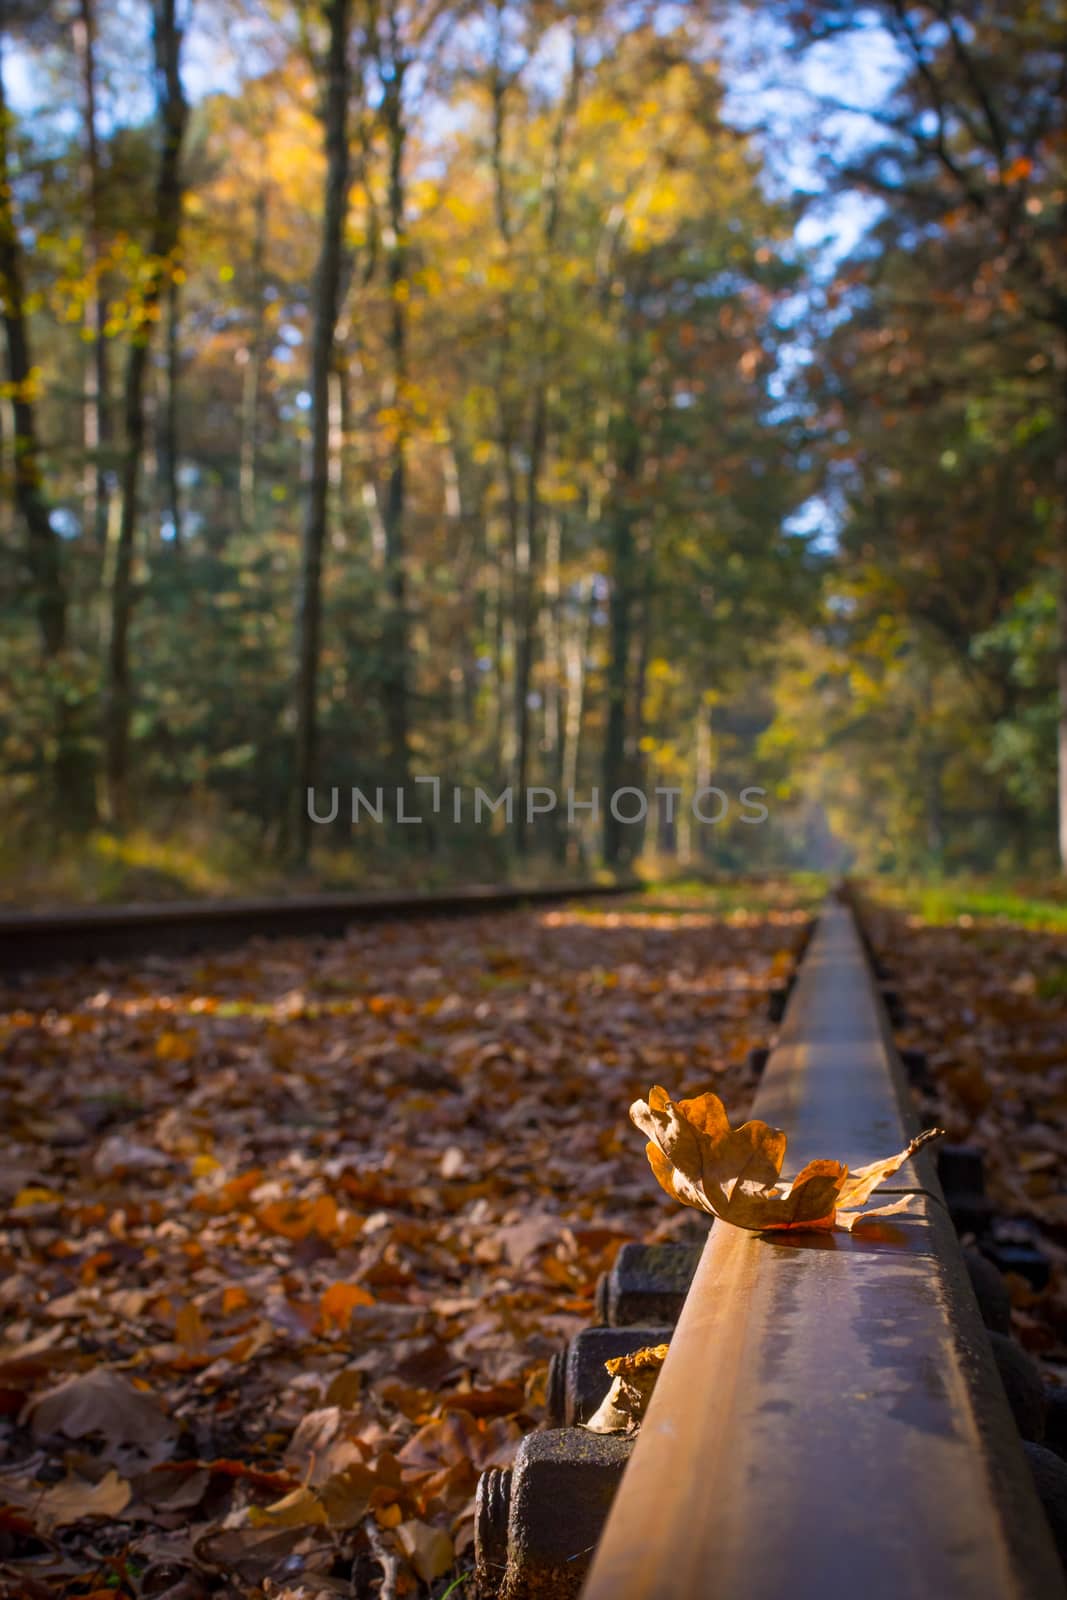 Leaf on a train track during fall season (autumn). Close-up and detail. by kb79